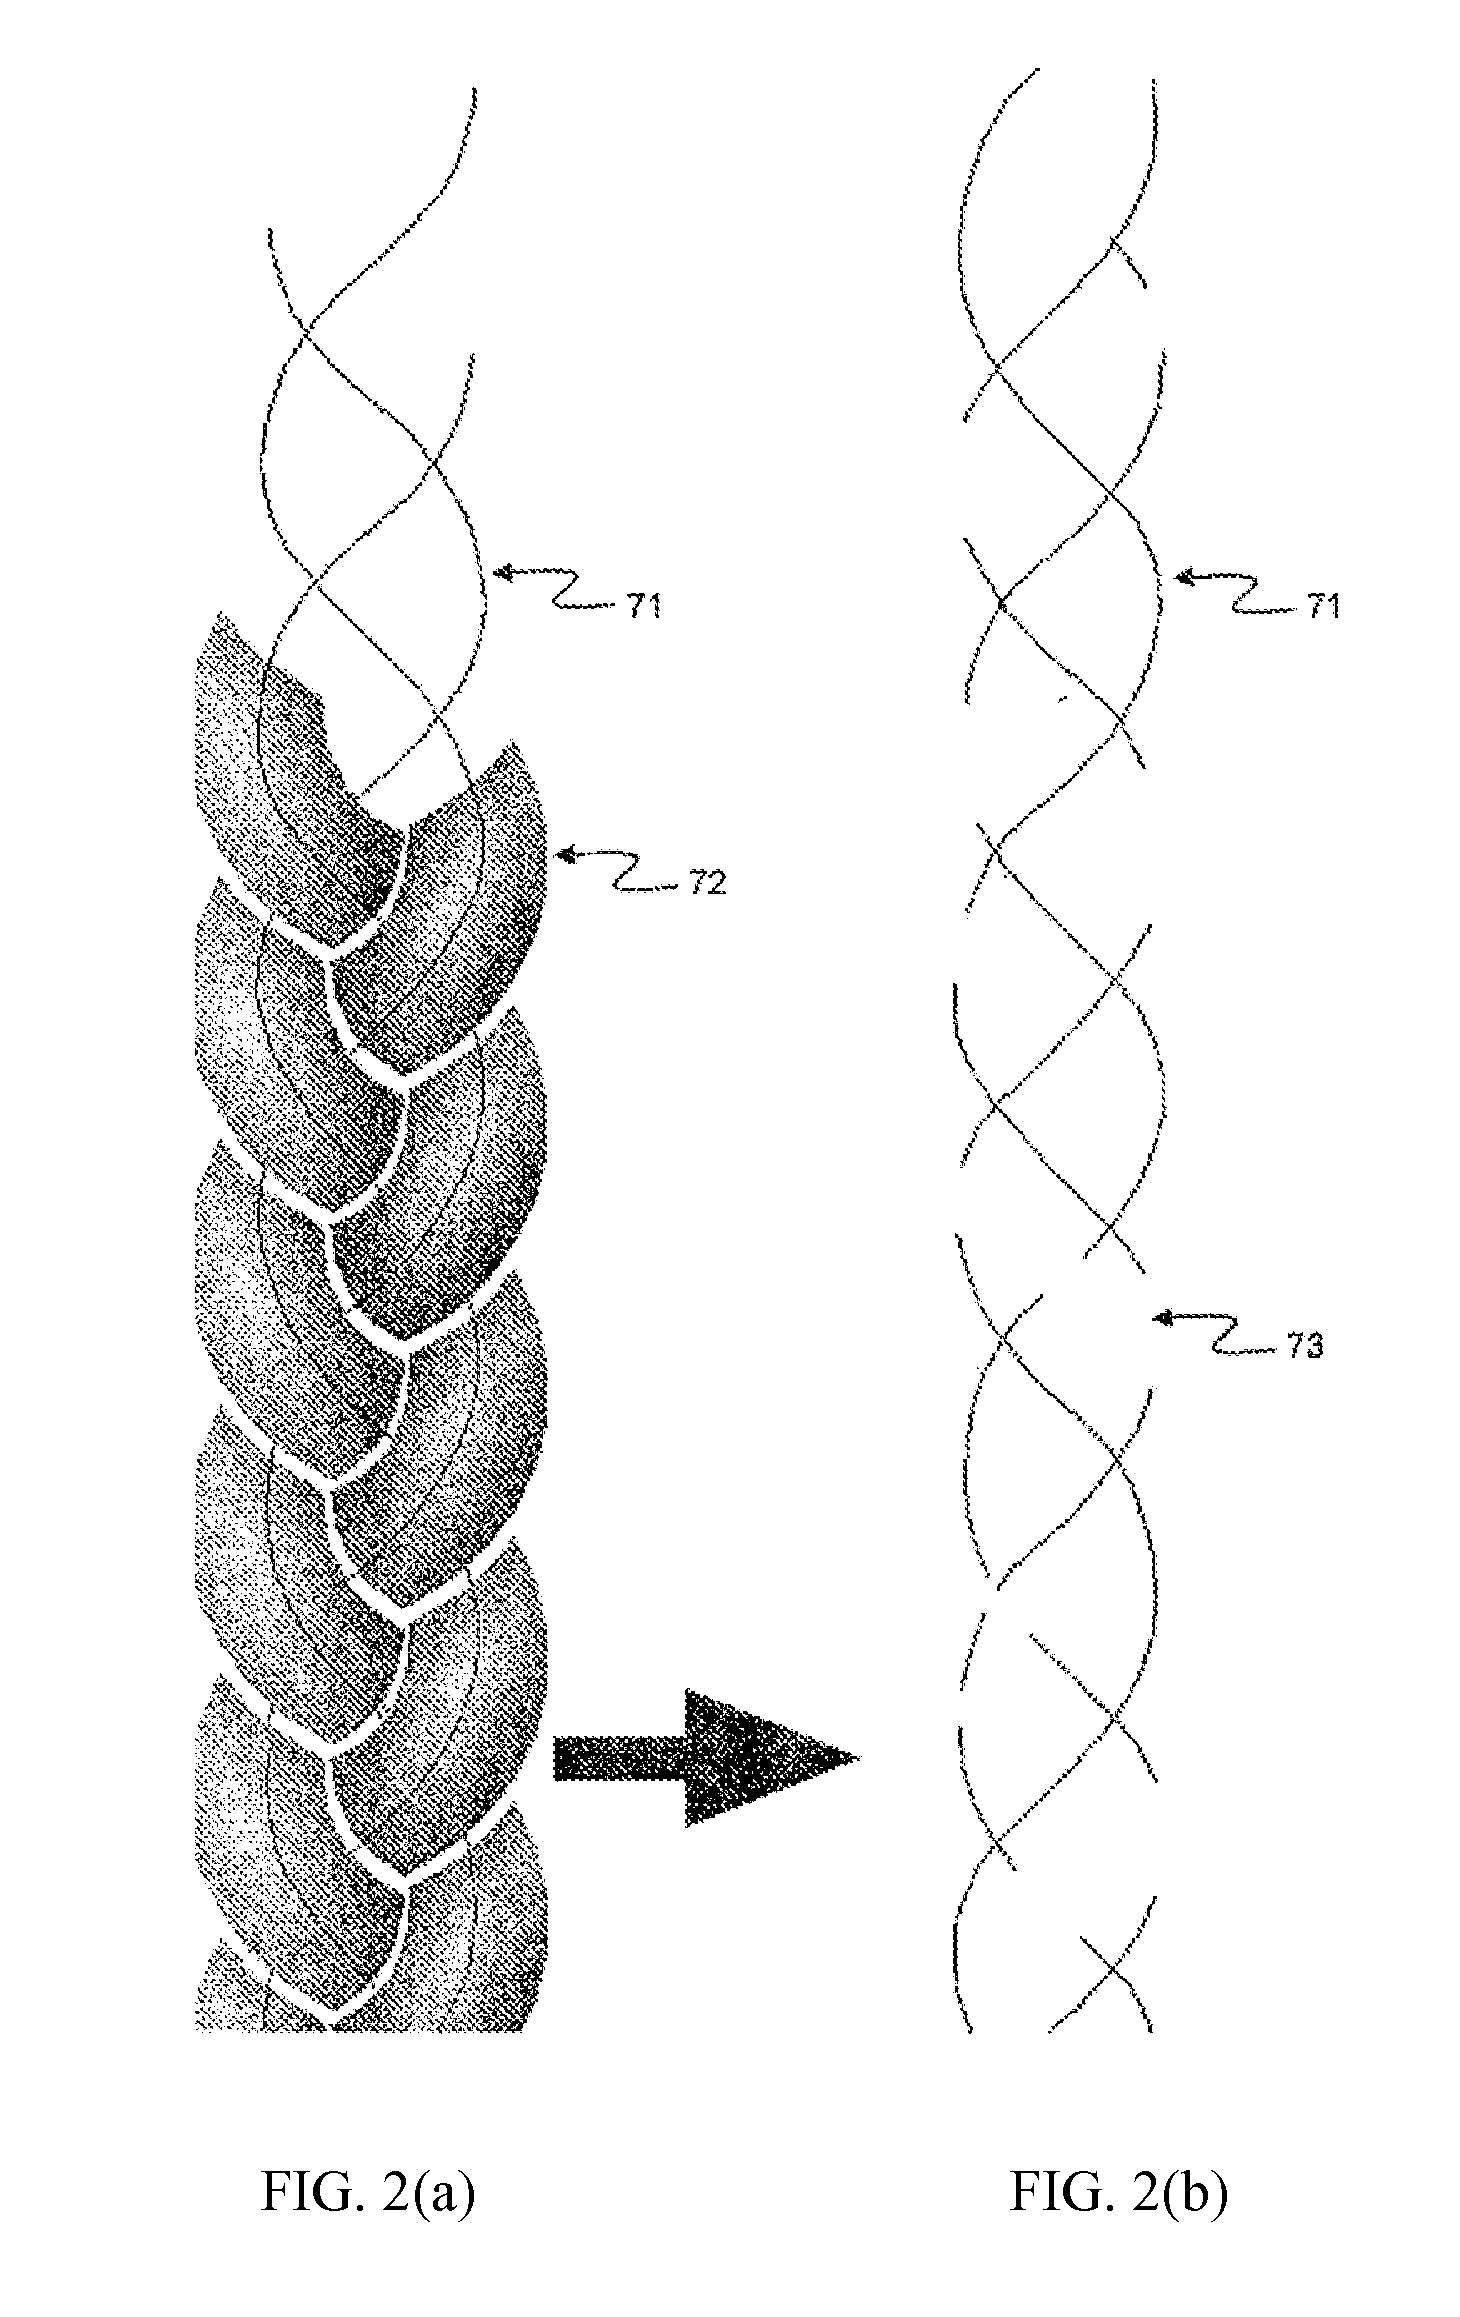 Supporting and forming transitional material for use in supporting prosthesis devices, implants and to provide structure in a human body